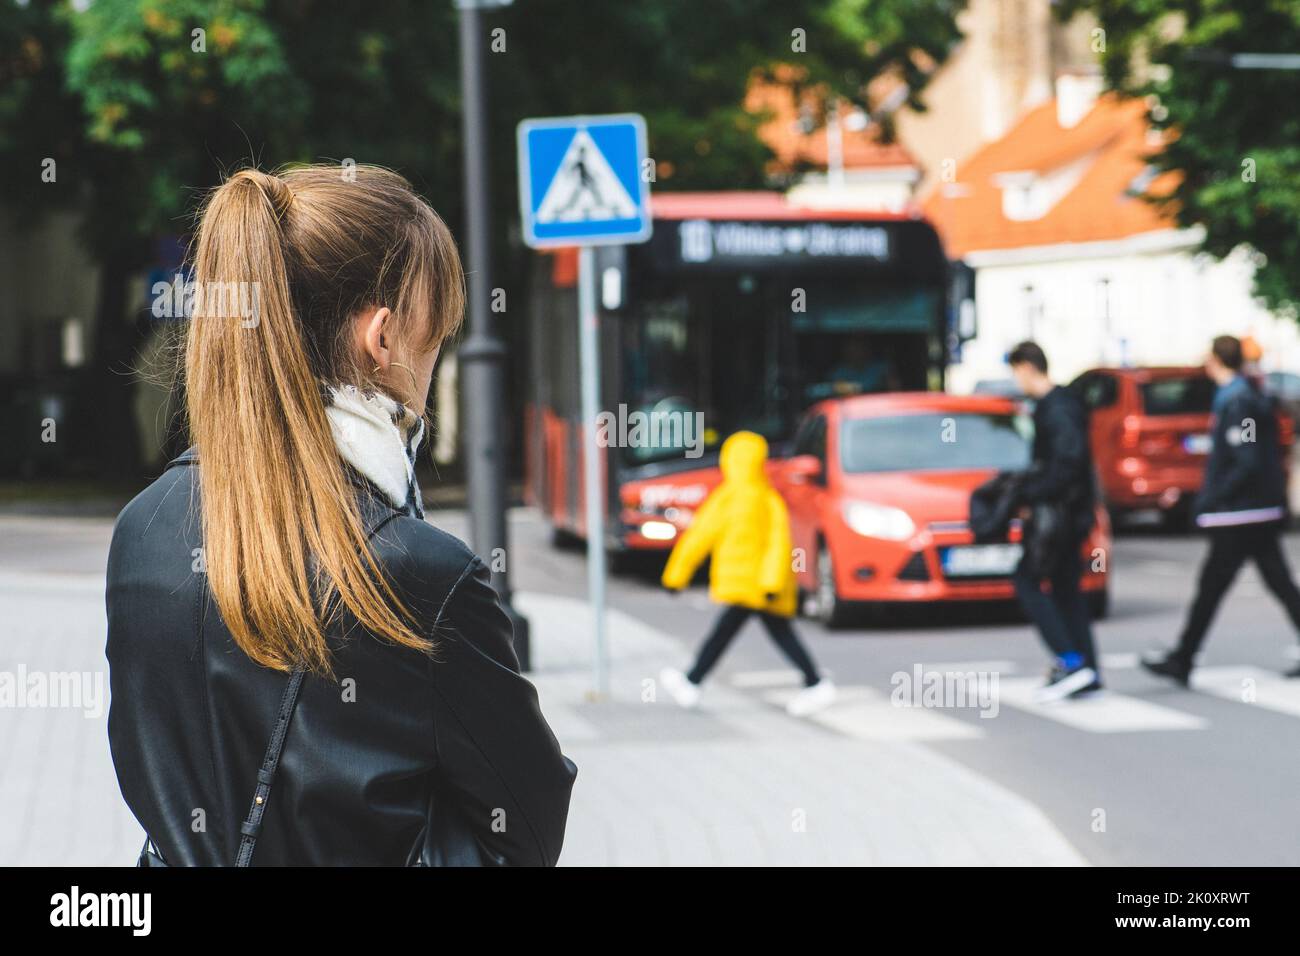 Blonde hair girl waiting at the bus stop on the sidewalk near the road with pedestrian crossing and bus coming in Vilnius, Lithuania Stock Photo